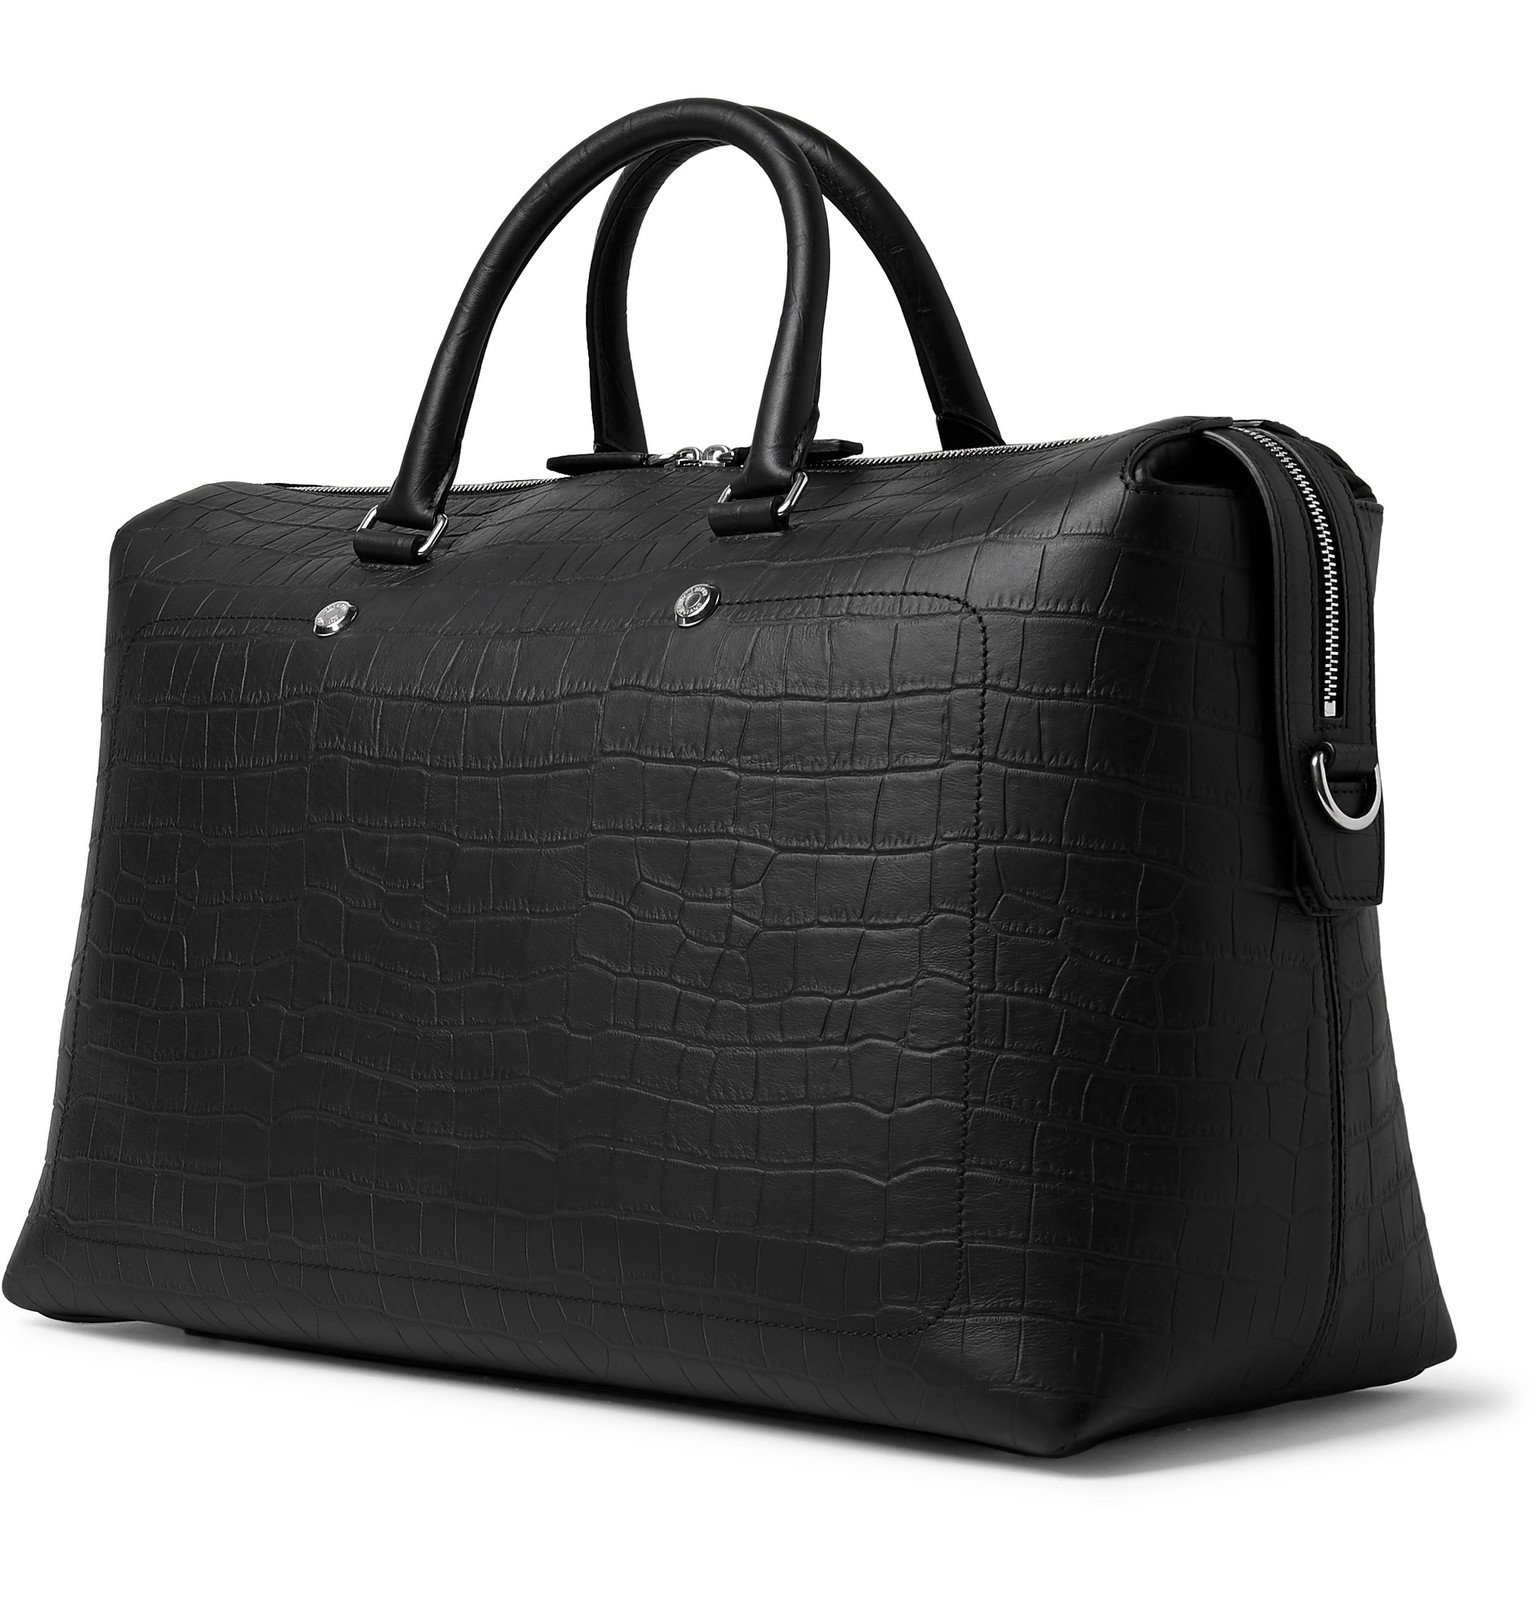 Mulberry - City Weekender Croc-Effect Leather Holdall - Black Mulberry